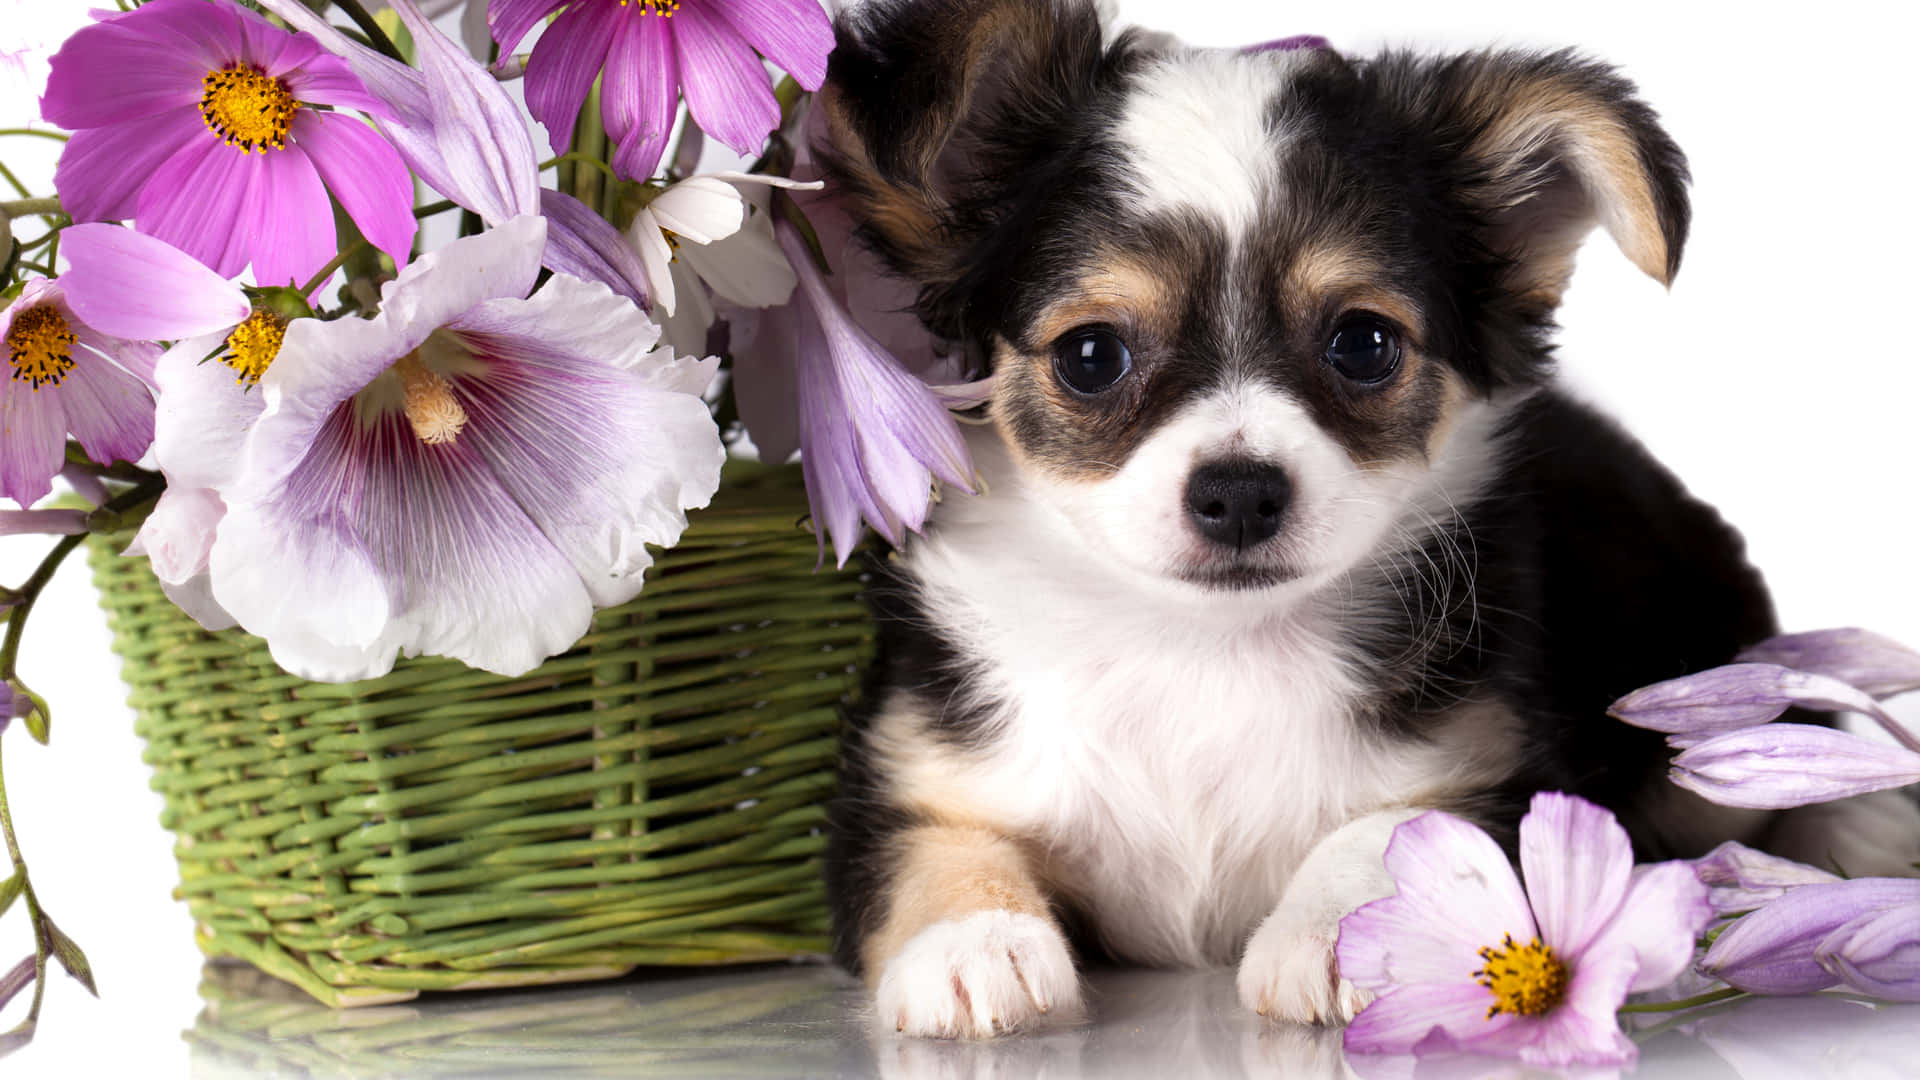 Baby Chihuahua Dog With Flowers Wallpaper